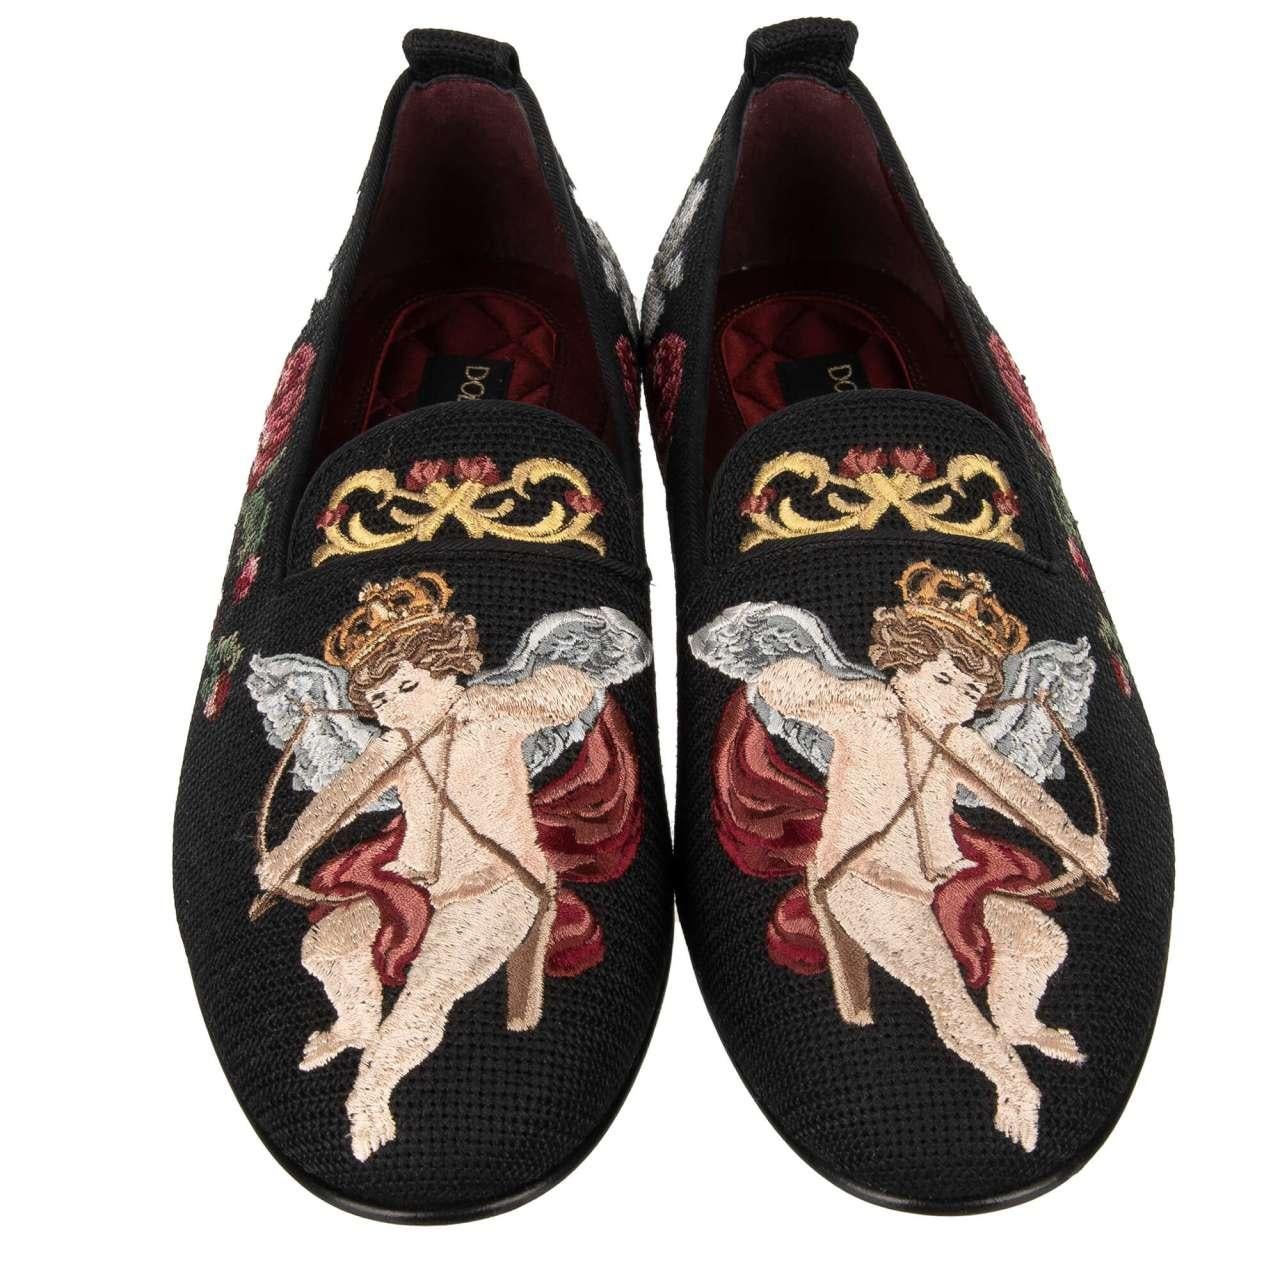 - Baroque crown angel and flowers embroidered fabric loafer shoes YOUNG POPE in black by DOLCE & GABBANA - MADE IN ITALY - New with Box - Model: A50194-AU441-80995 - Material: outside: 100% Polyester, inside: 100% Calfskin - Sole: Leather - Color: